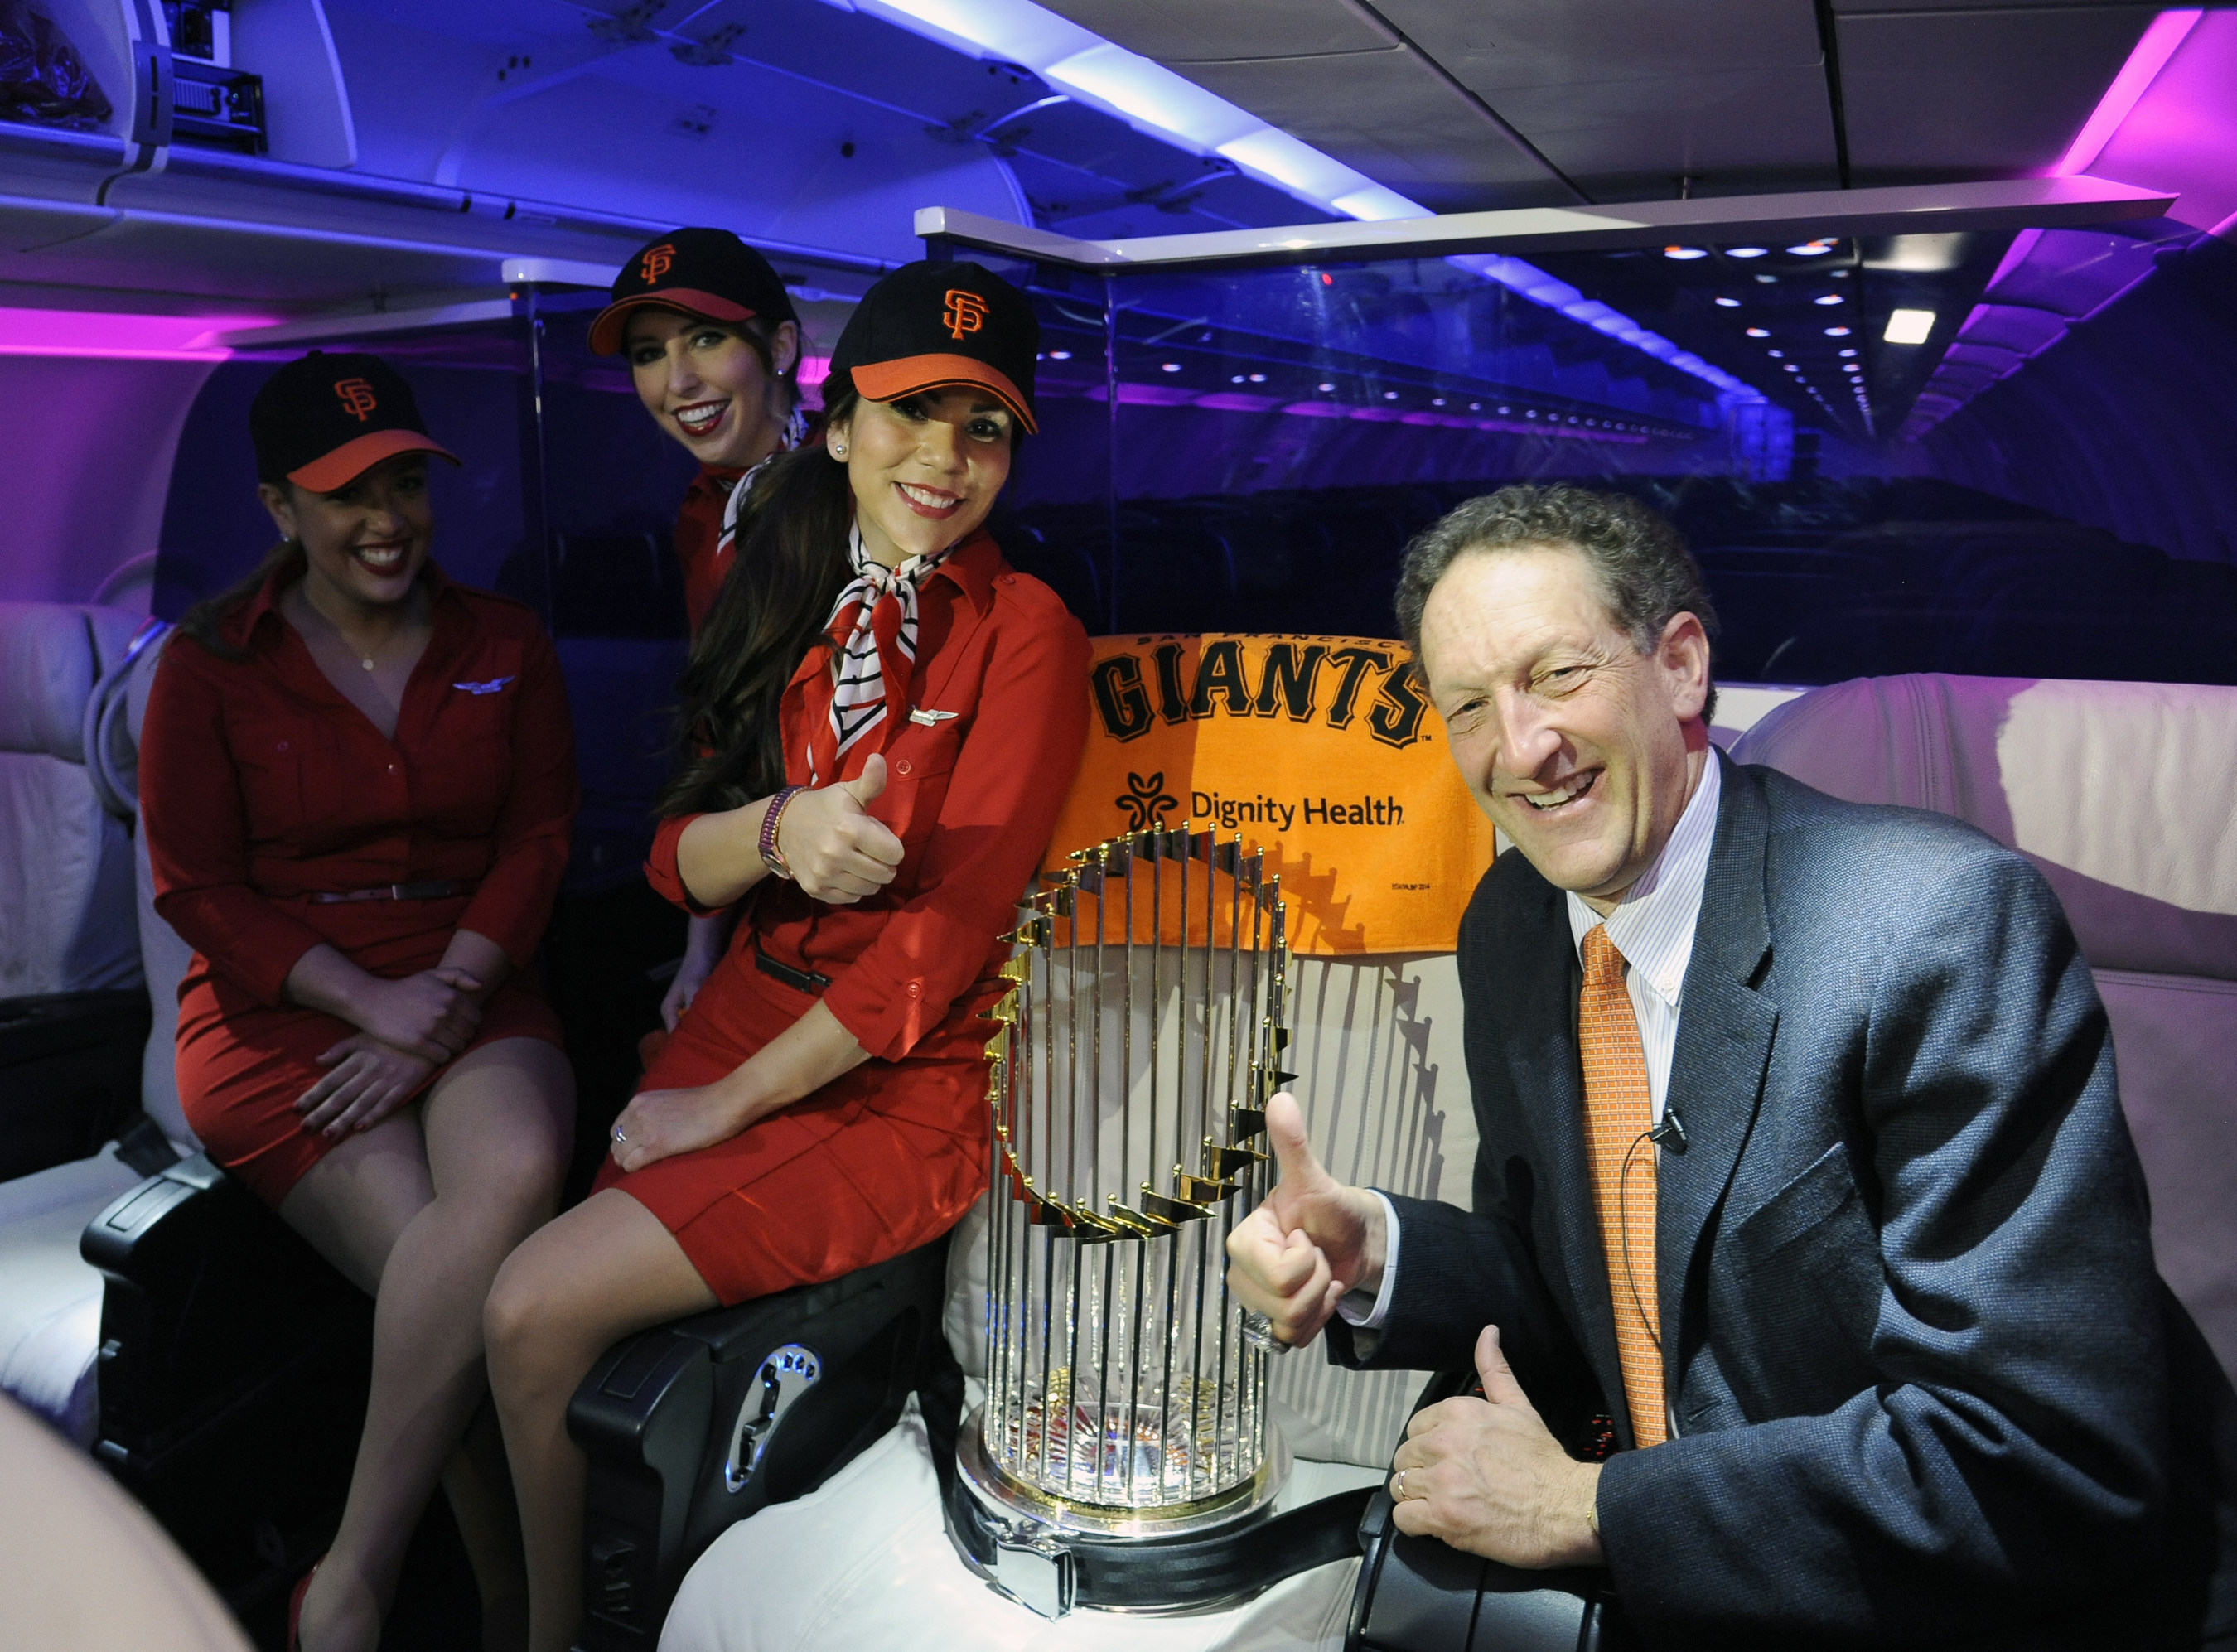 Virgin America And San Francisco Giants Score Big With Extended Partnership Agreement